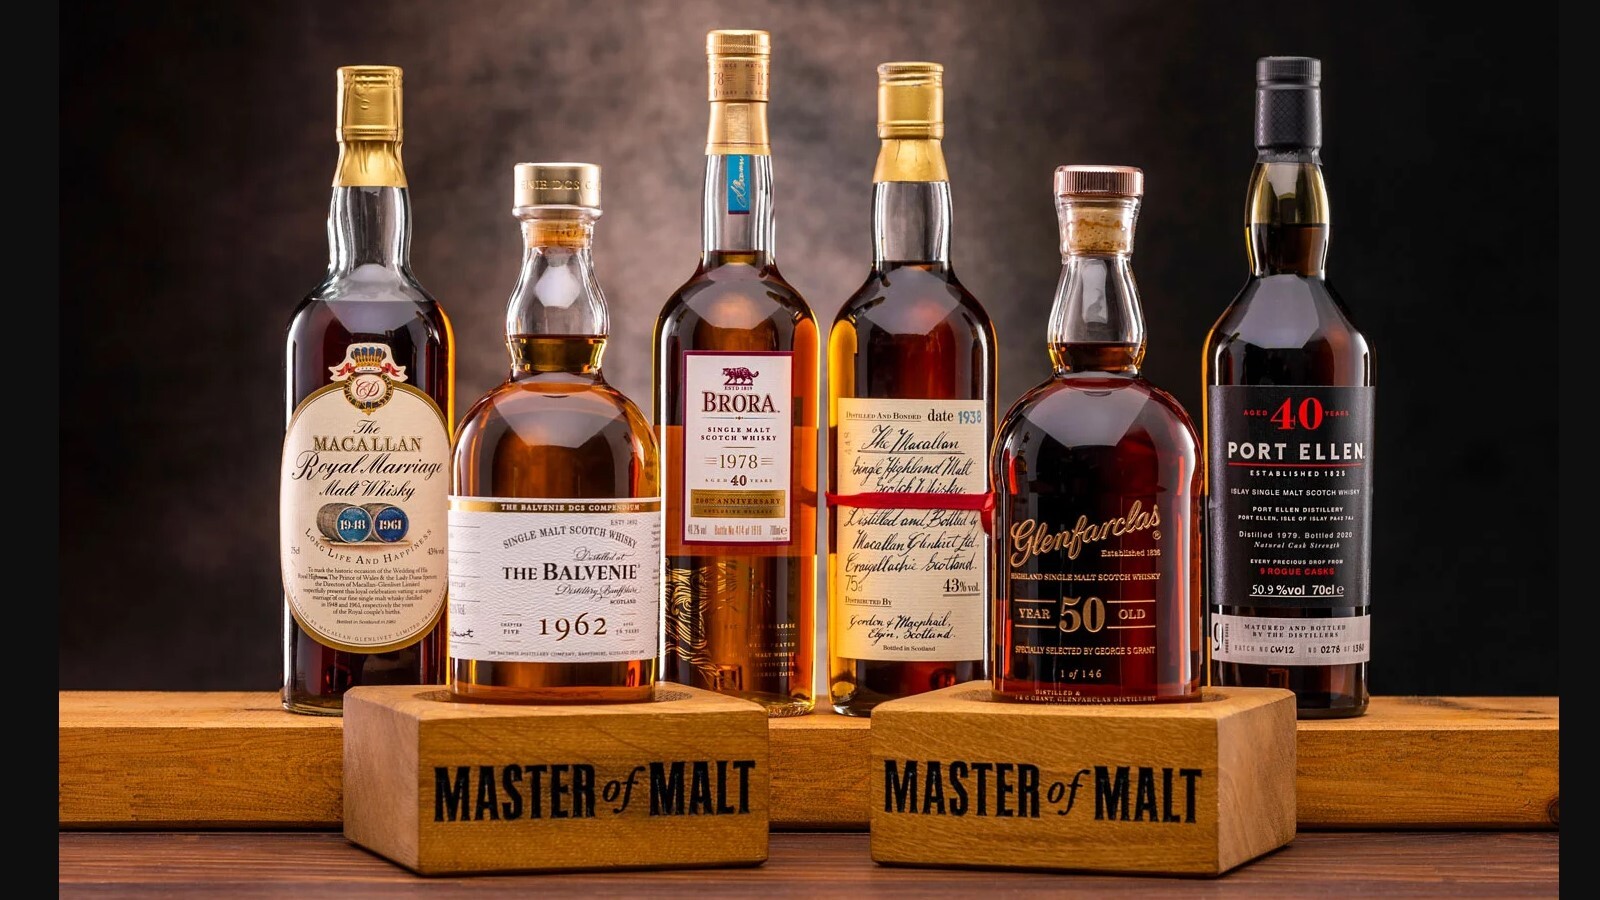 Master of Malt Review: A Deep Dive into the Quality and Variety of Their Spirits